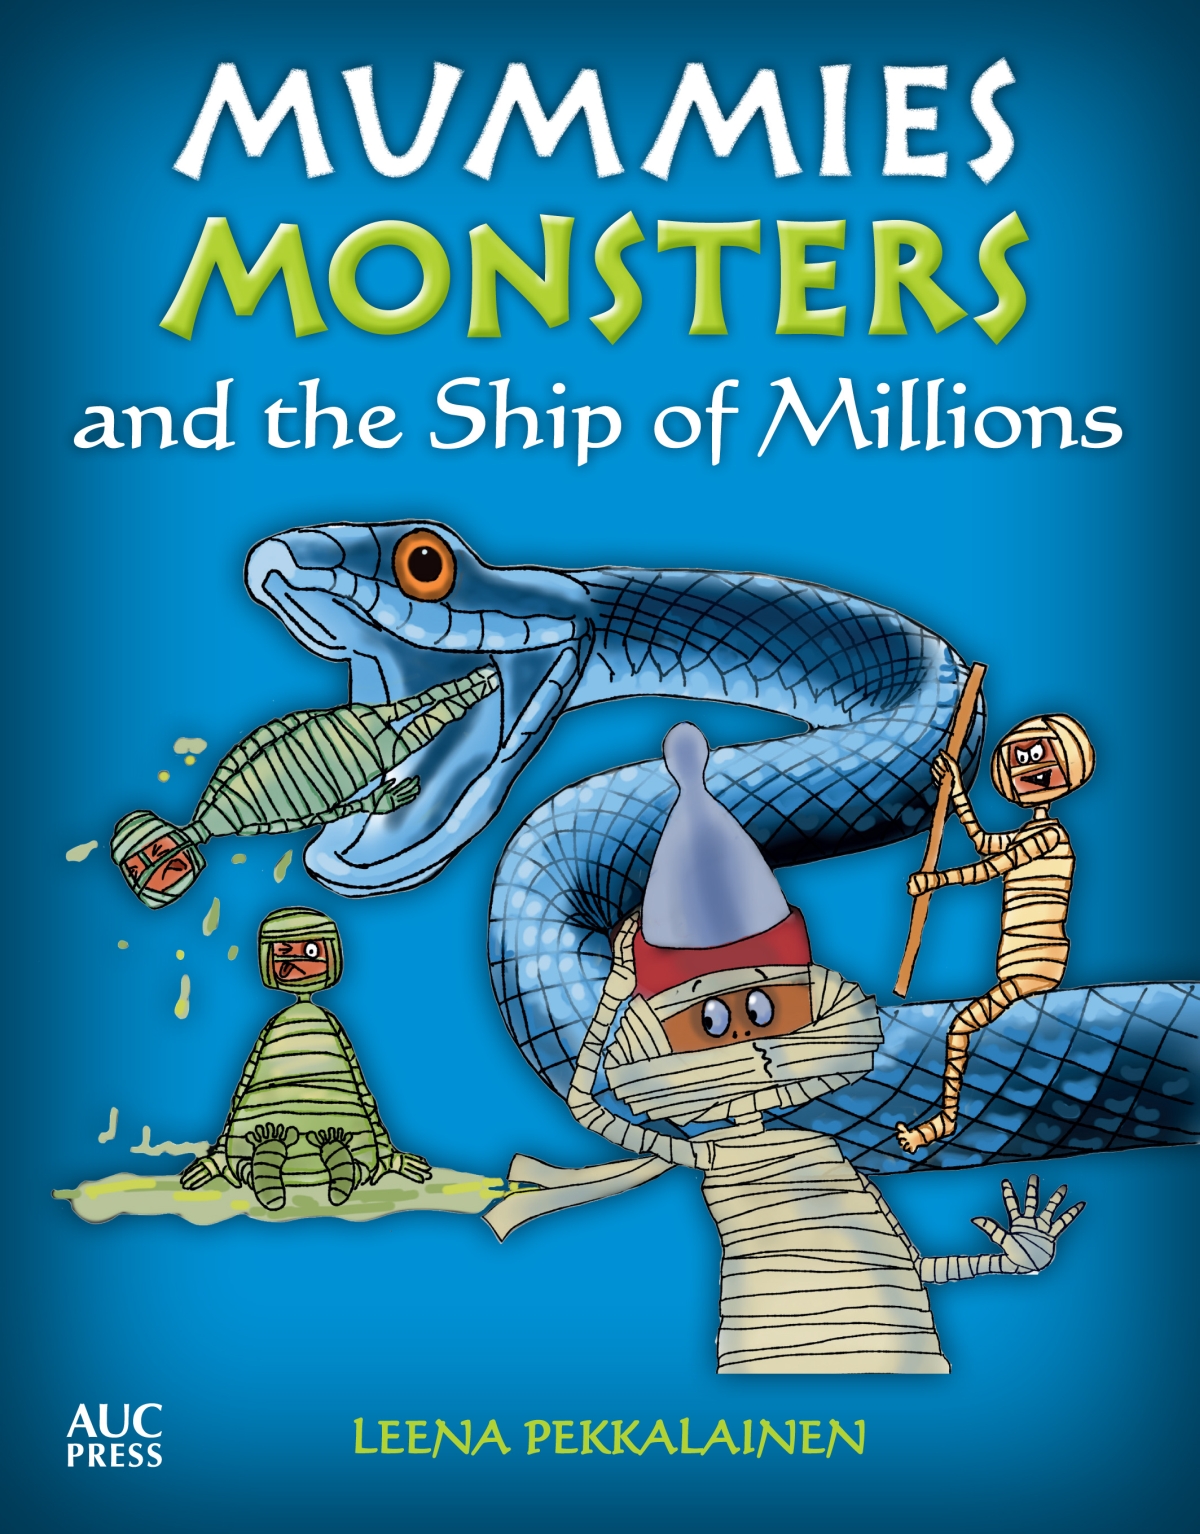 Mummies, Monsters and the Ship of Millions -- Leena's second Mr. Mummific book, which will be published in the fall of 2017.